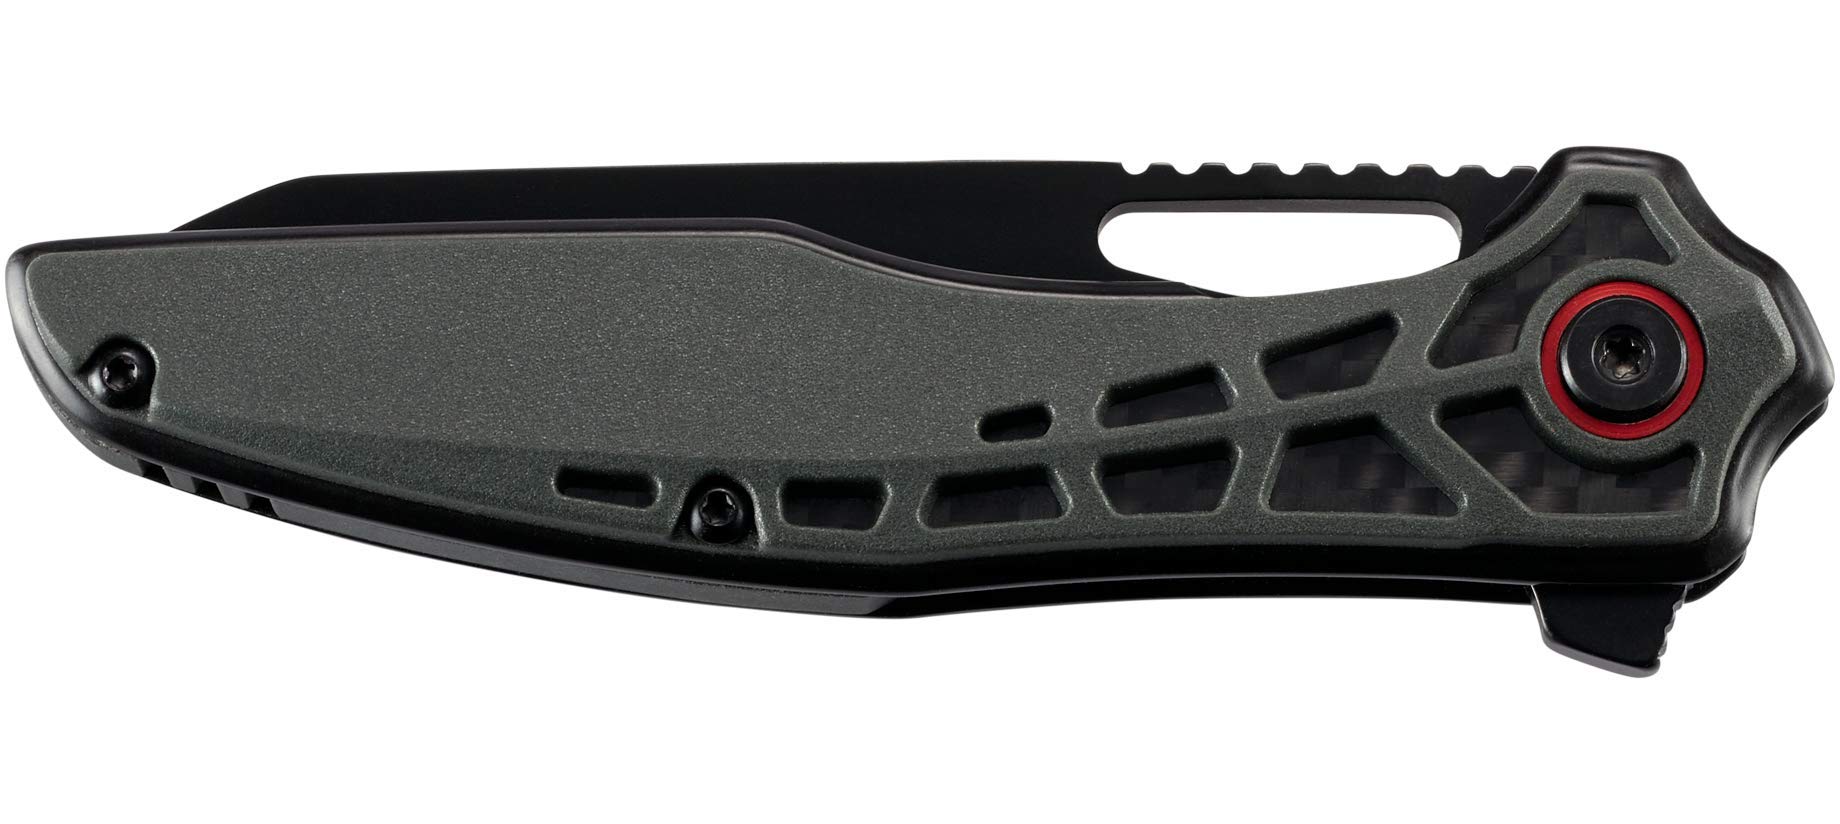 COLUMBIA RIVER KNIFE & TOOL Thero EDC Folding Pocket Knife: Everyday Carry Folder, Plain Edge, Sheepsfoot Blade with Black Oxide Finish, Flipper, Glass Reinforced Nylon and Carbon Fiber Handle 6290